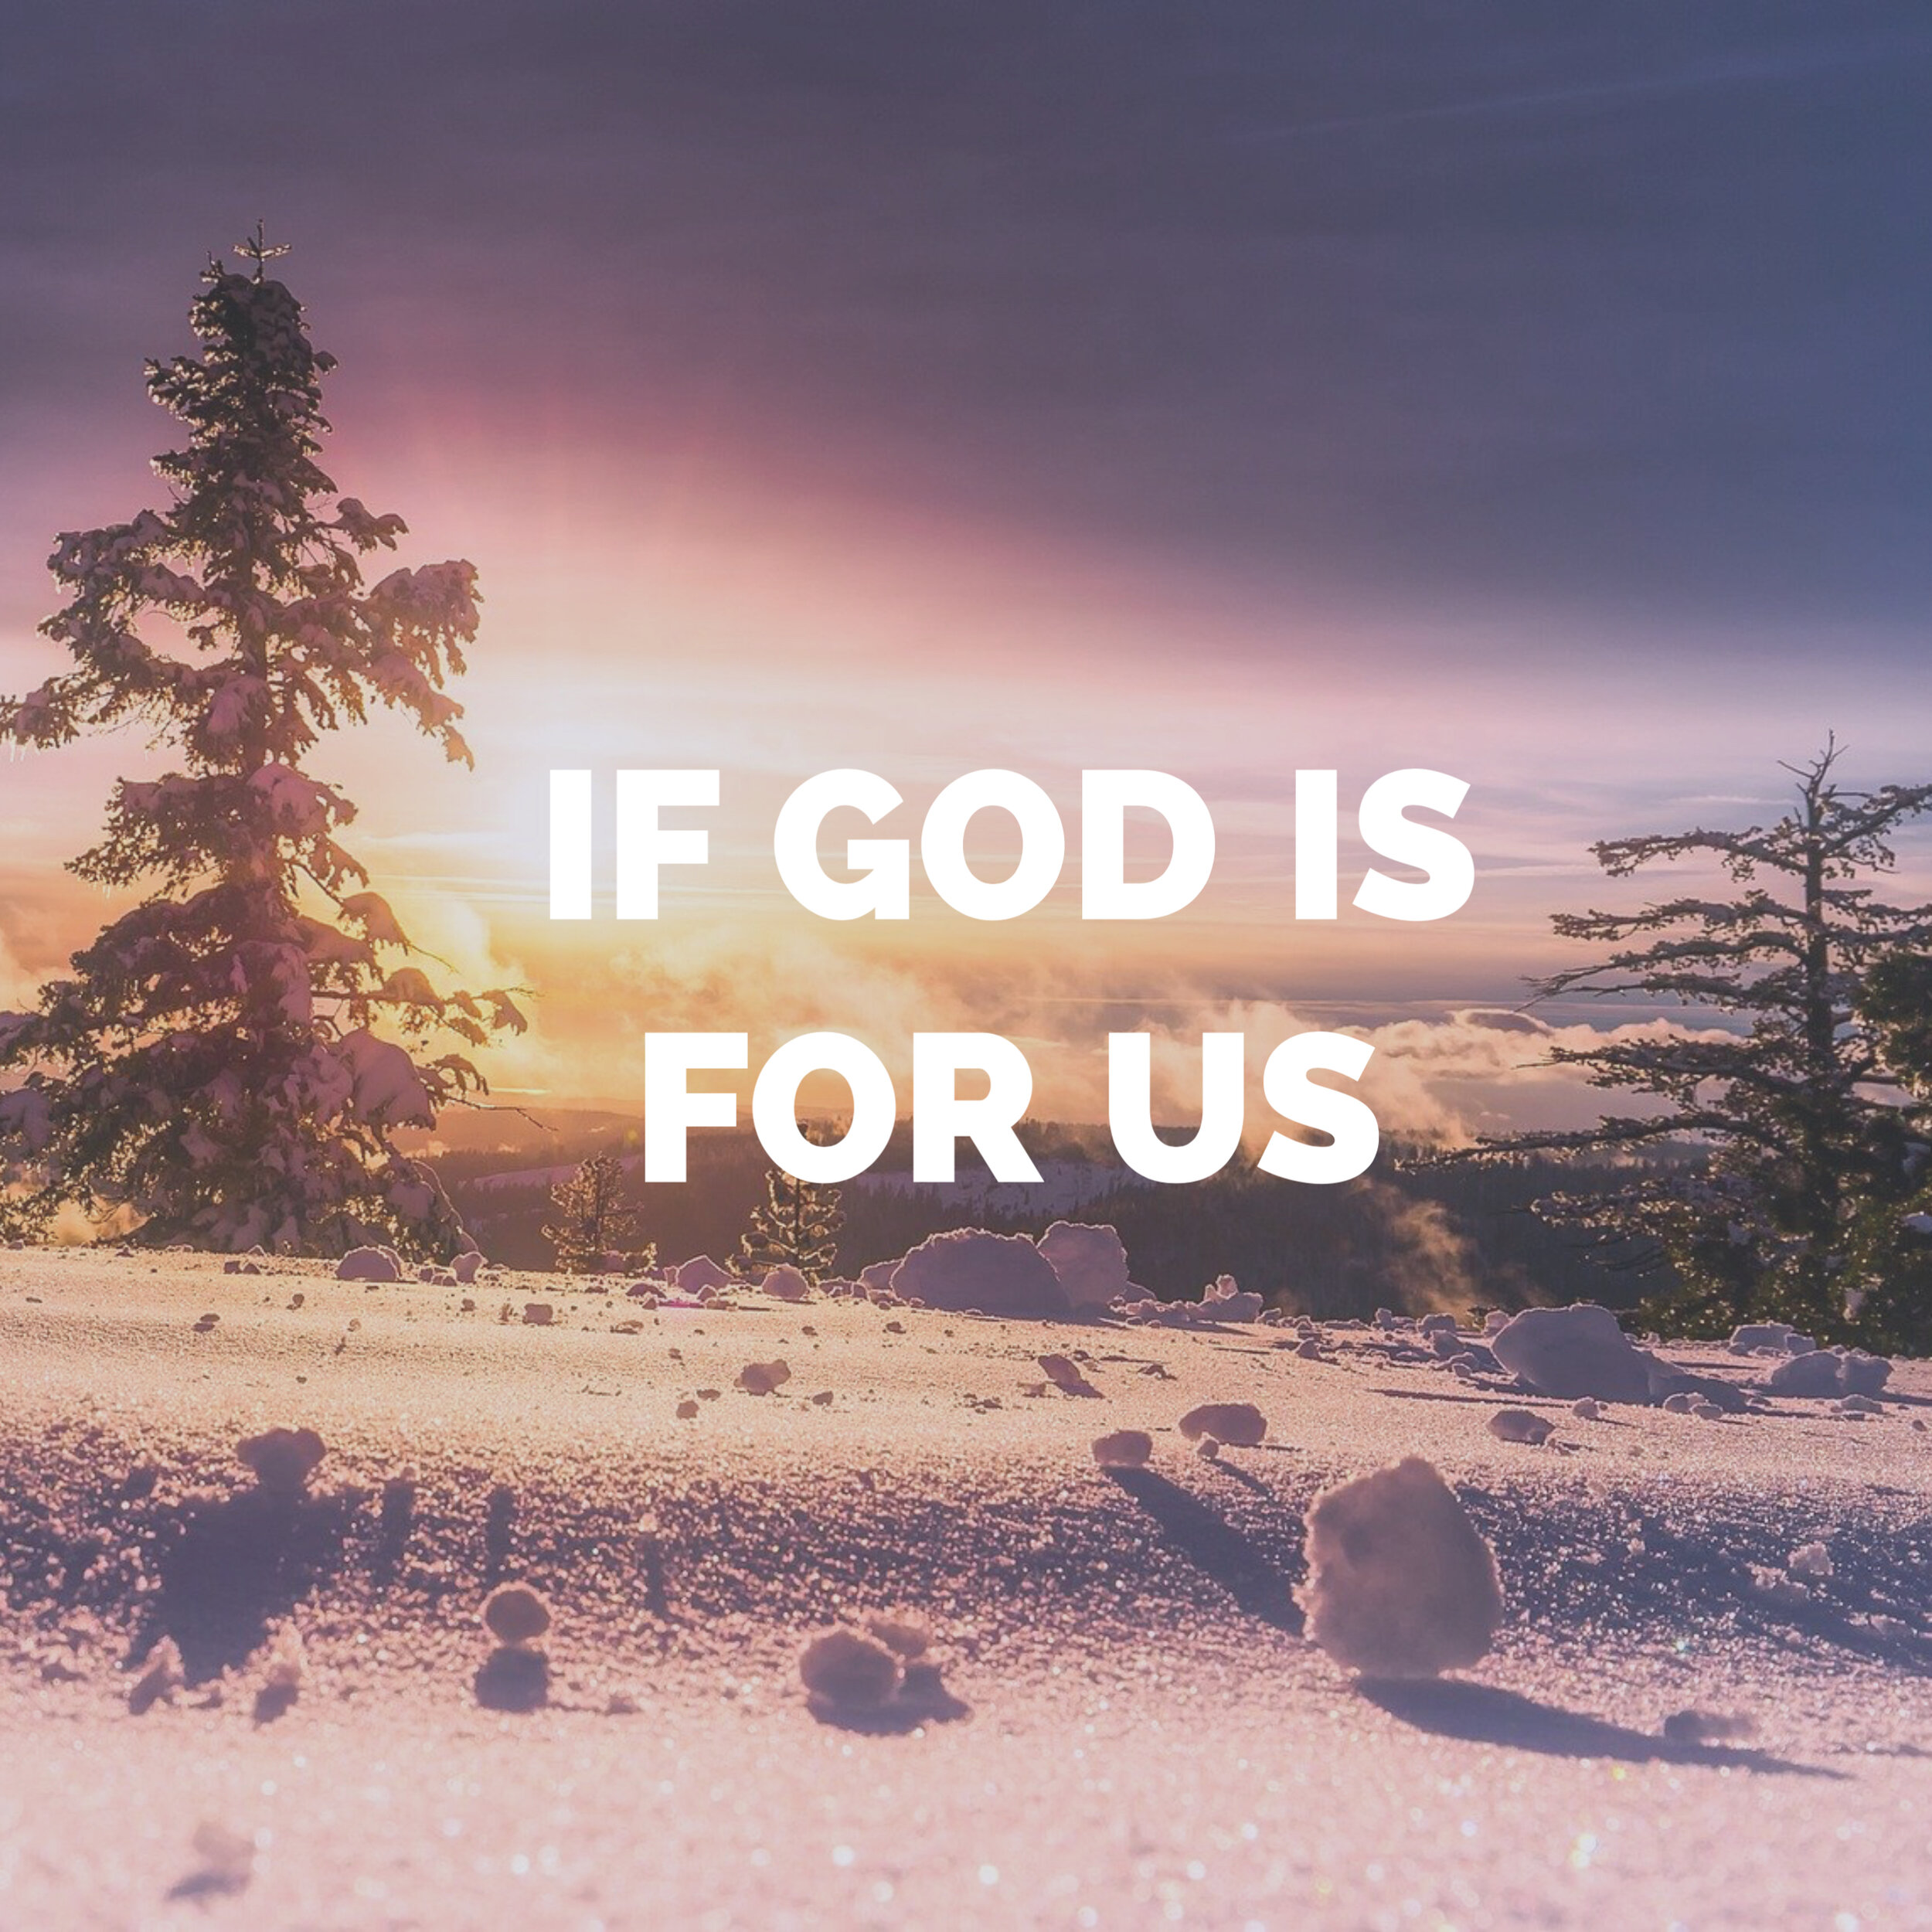 IF GOD IS FOR US.jpg